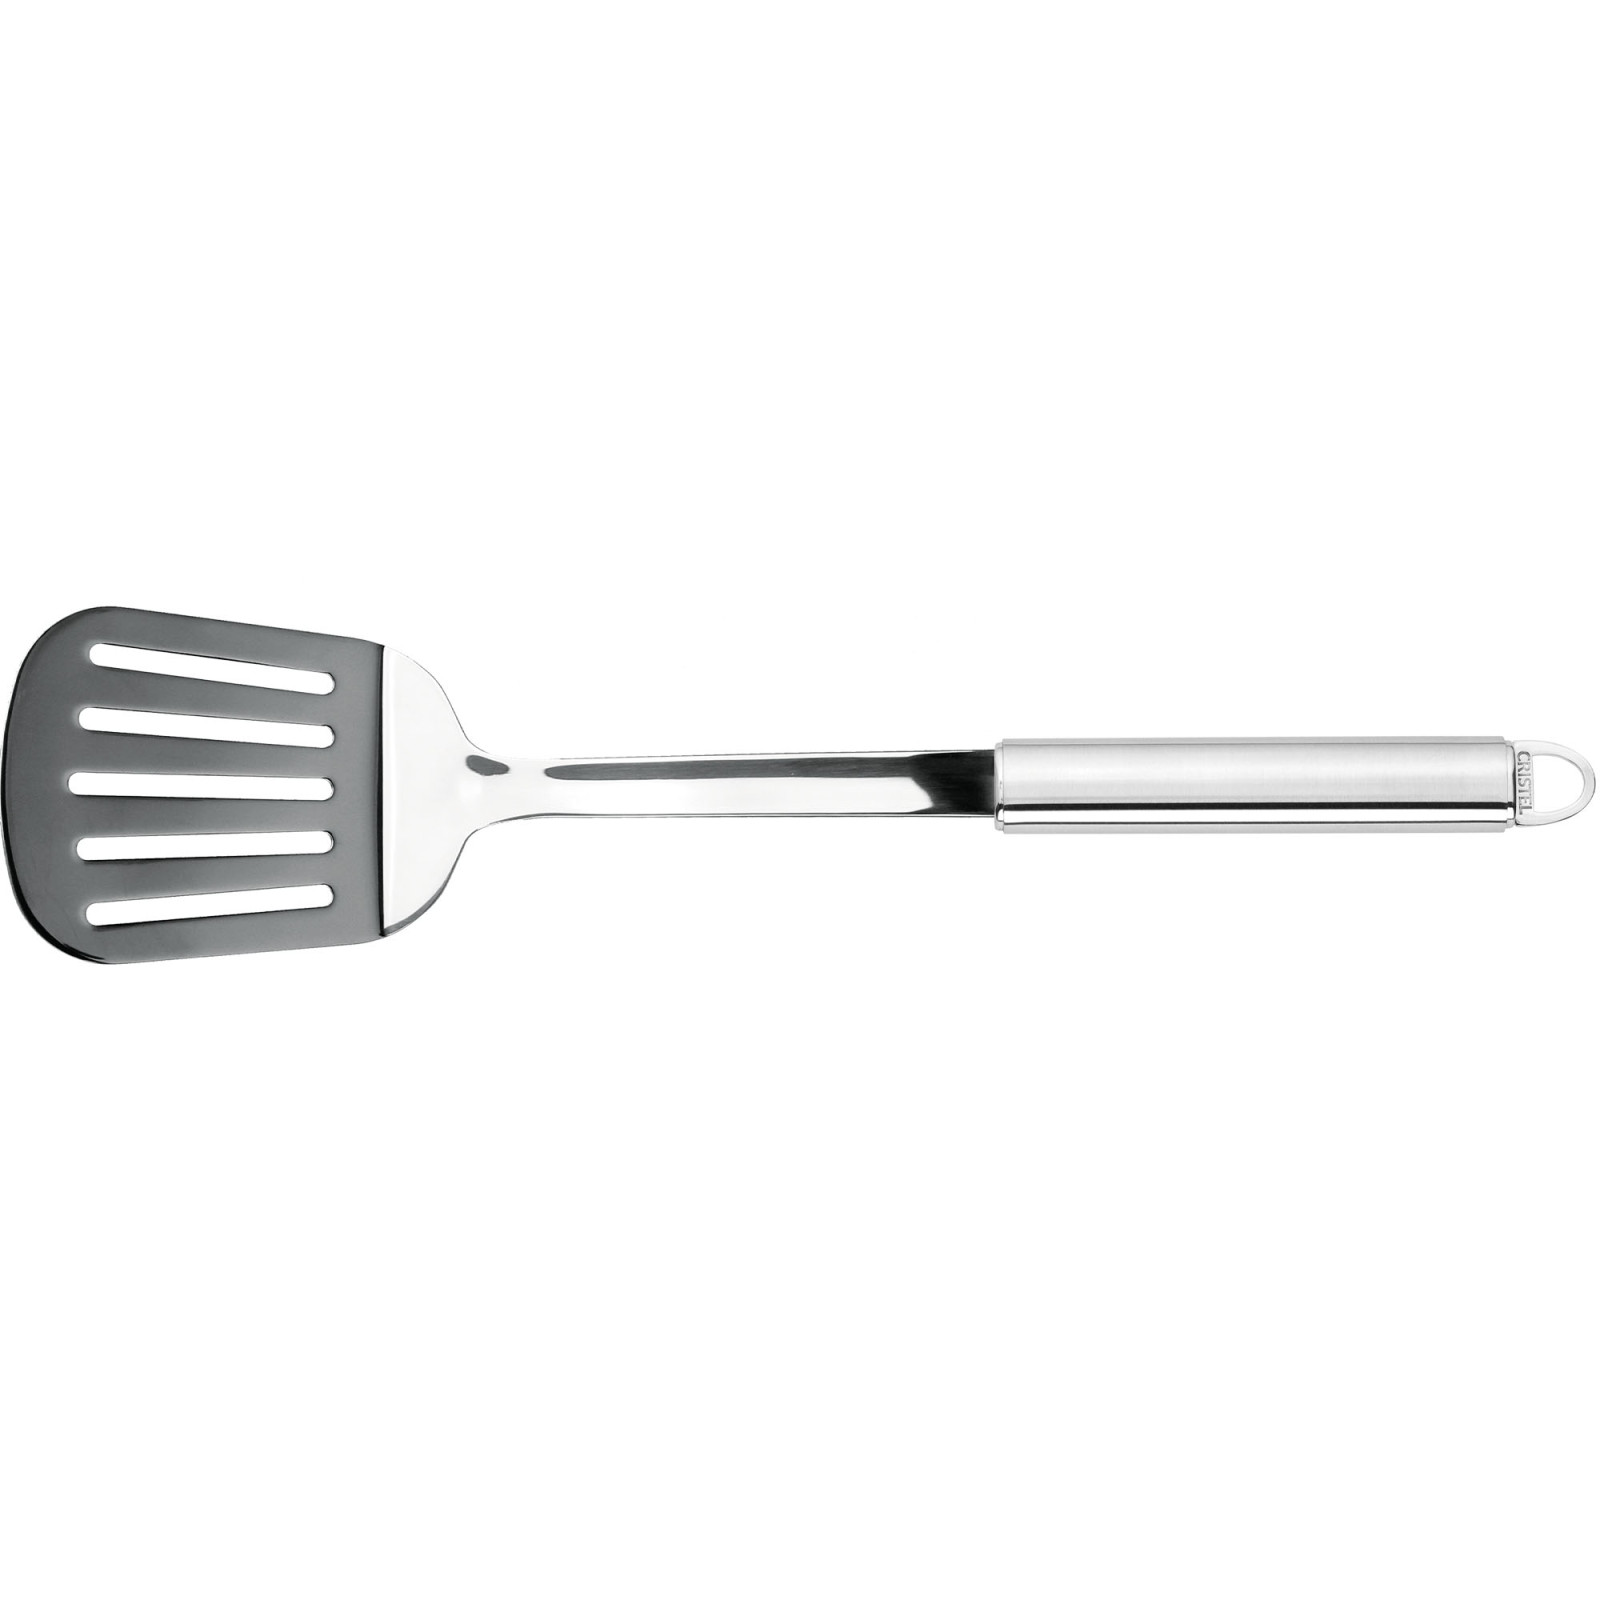 Perforated frying spatula PA +